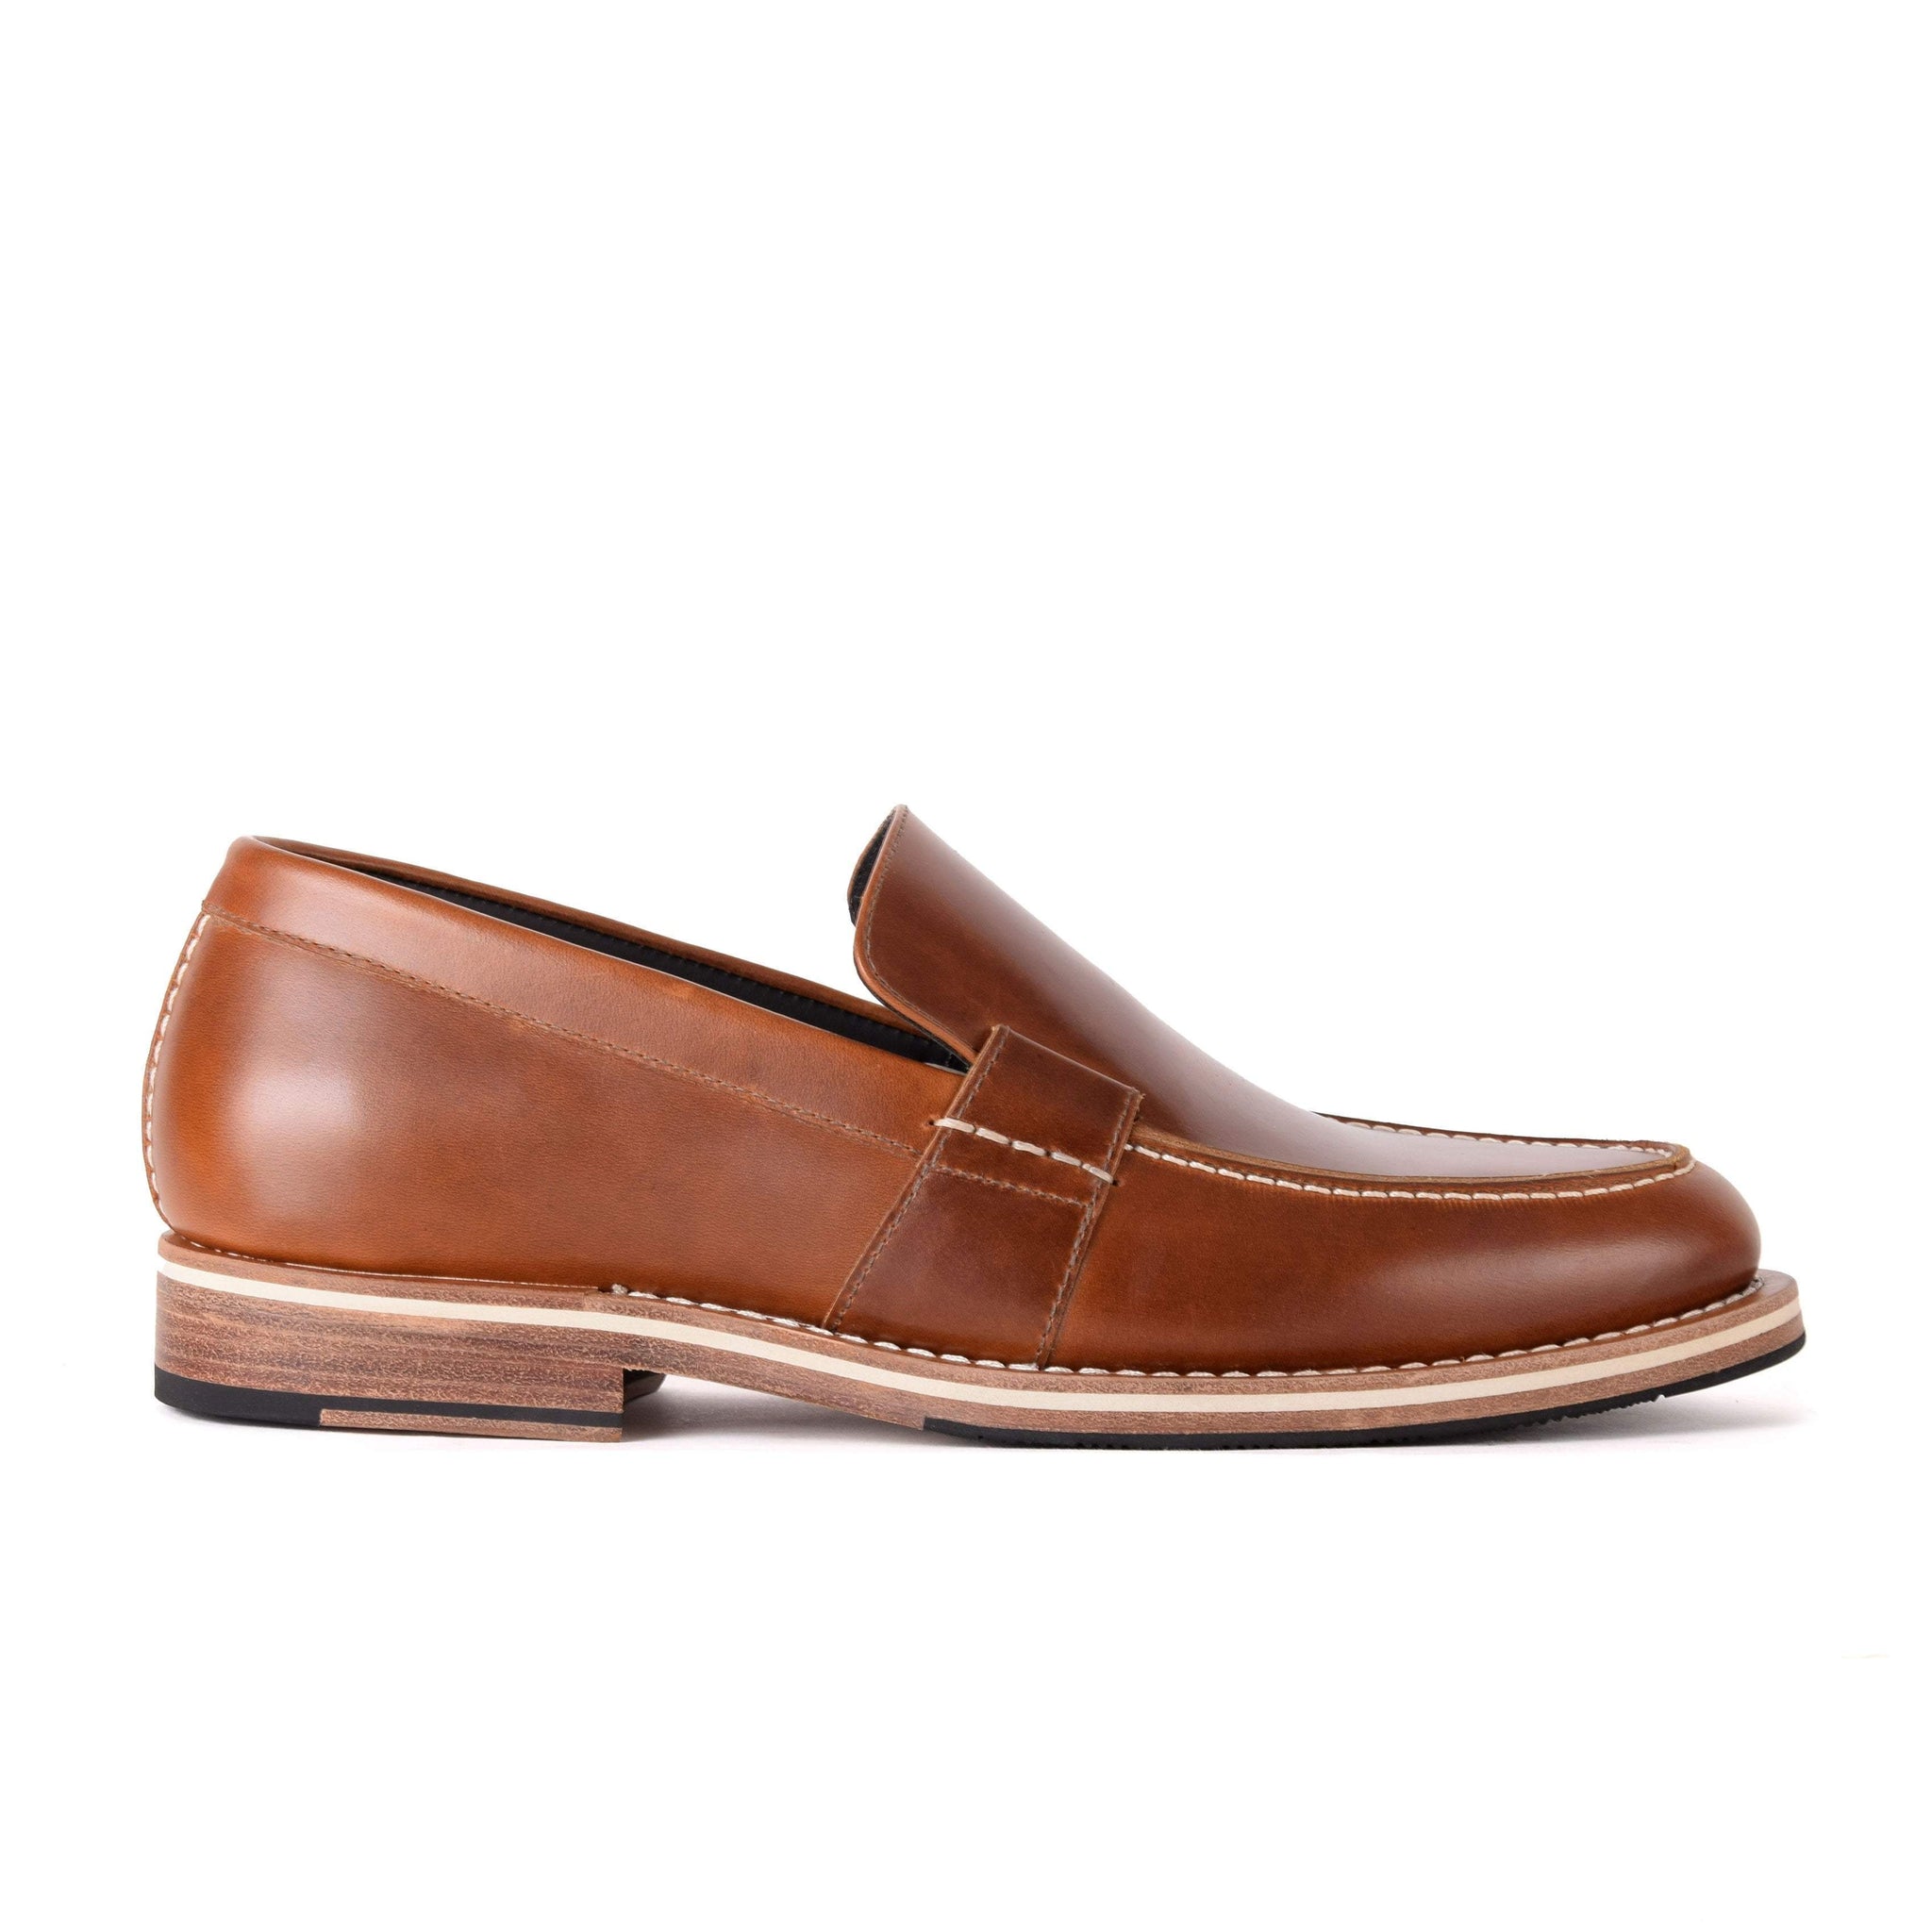 The Wilson Teak by HELM Boots